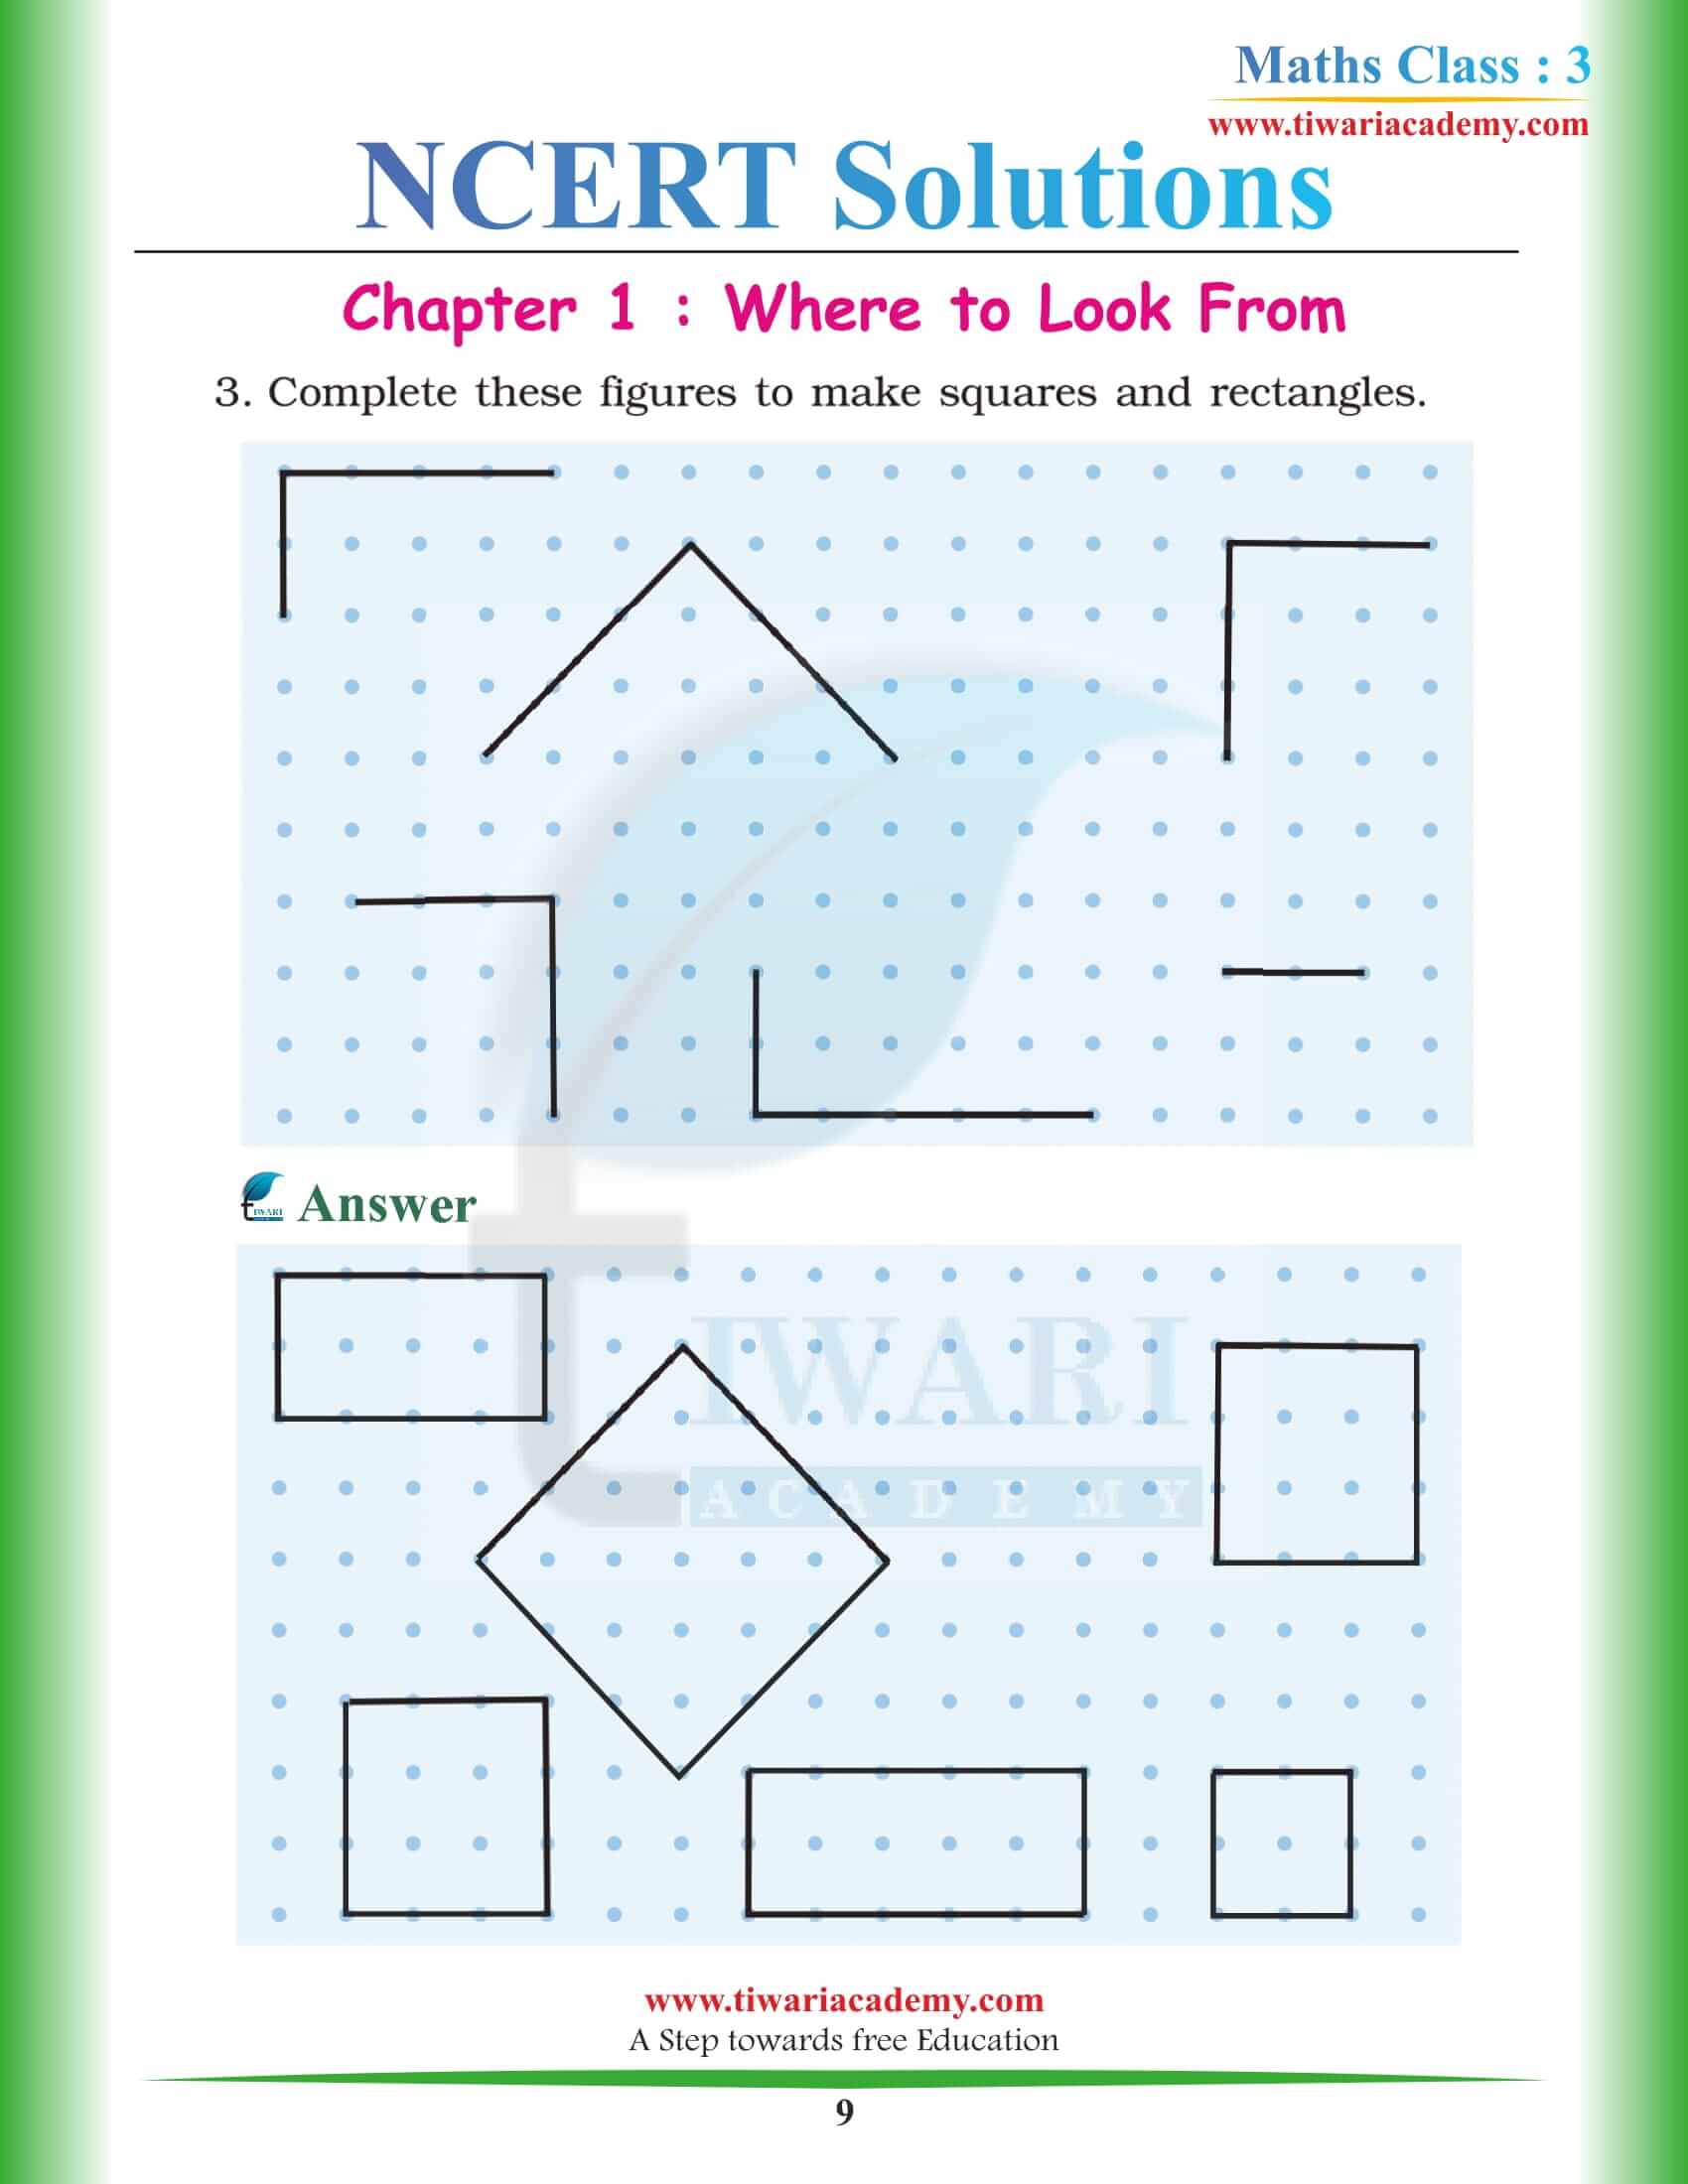 NCERT Solutions for Class 3 Maths Chapter 1 in PDF